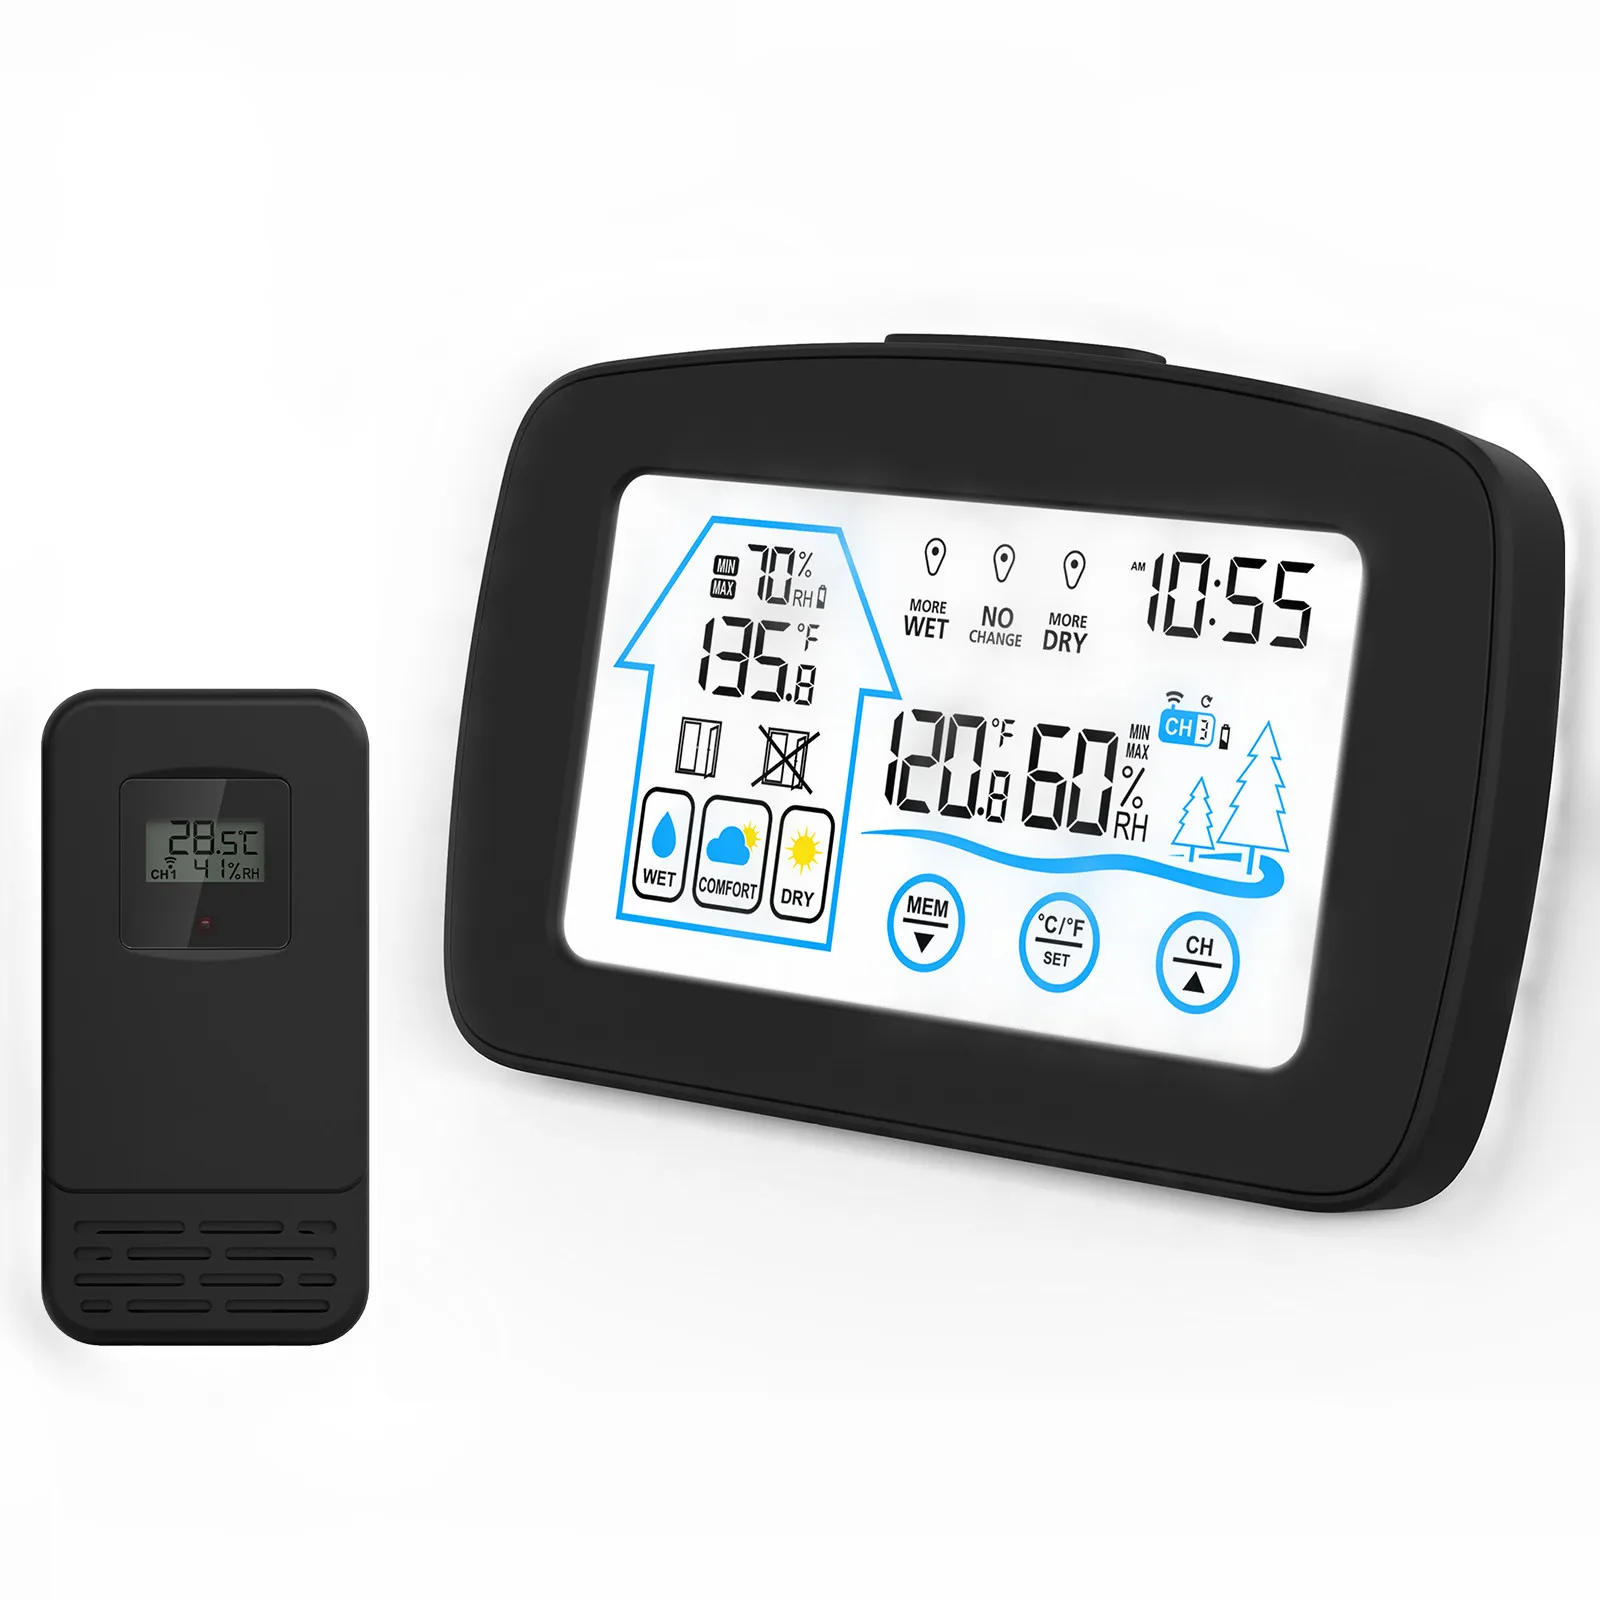 

Digital Wireless Weather Station Sensor Electronic Temp Humidity Meter Indoor/Outdoor Hygrometer Thermometer with Time Backlight